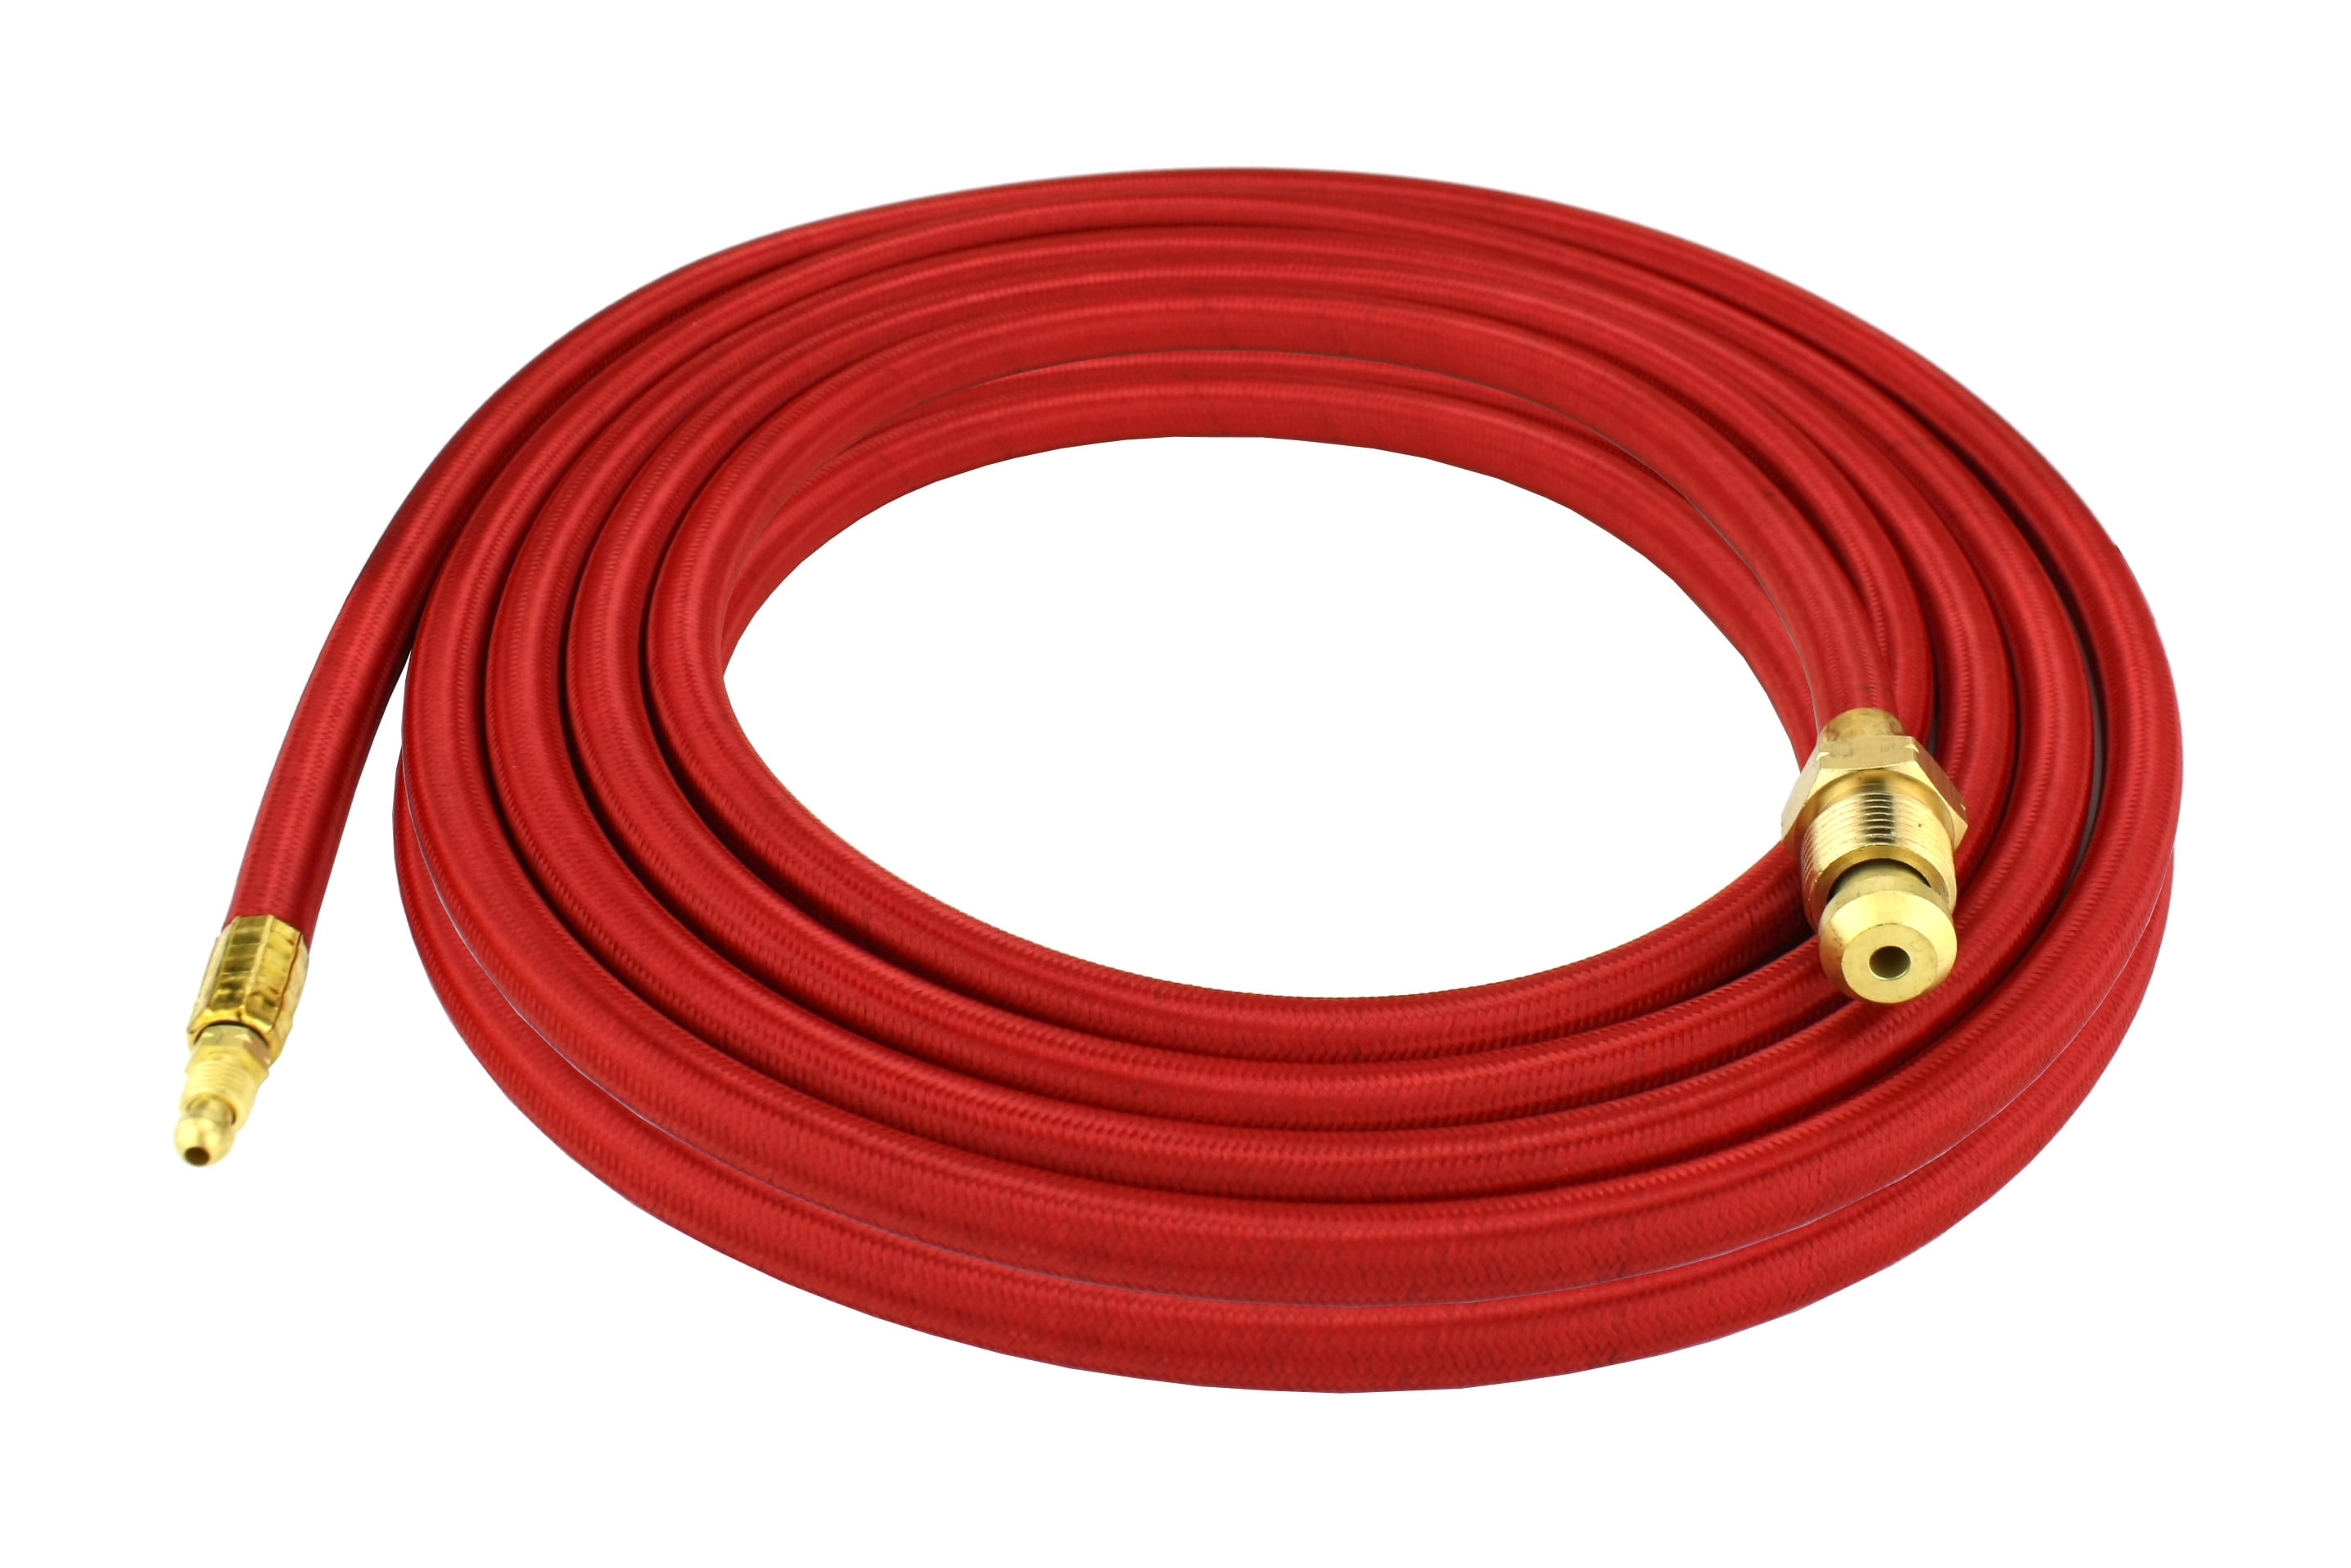 12.5 Feet Model 40V64-R Super Flex Red Braided Power Cable for 18 Series Water-Cooled TIG Torches 